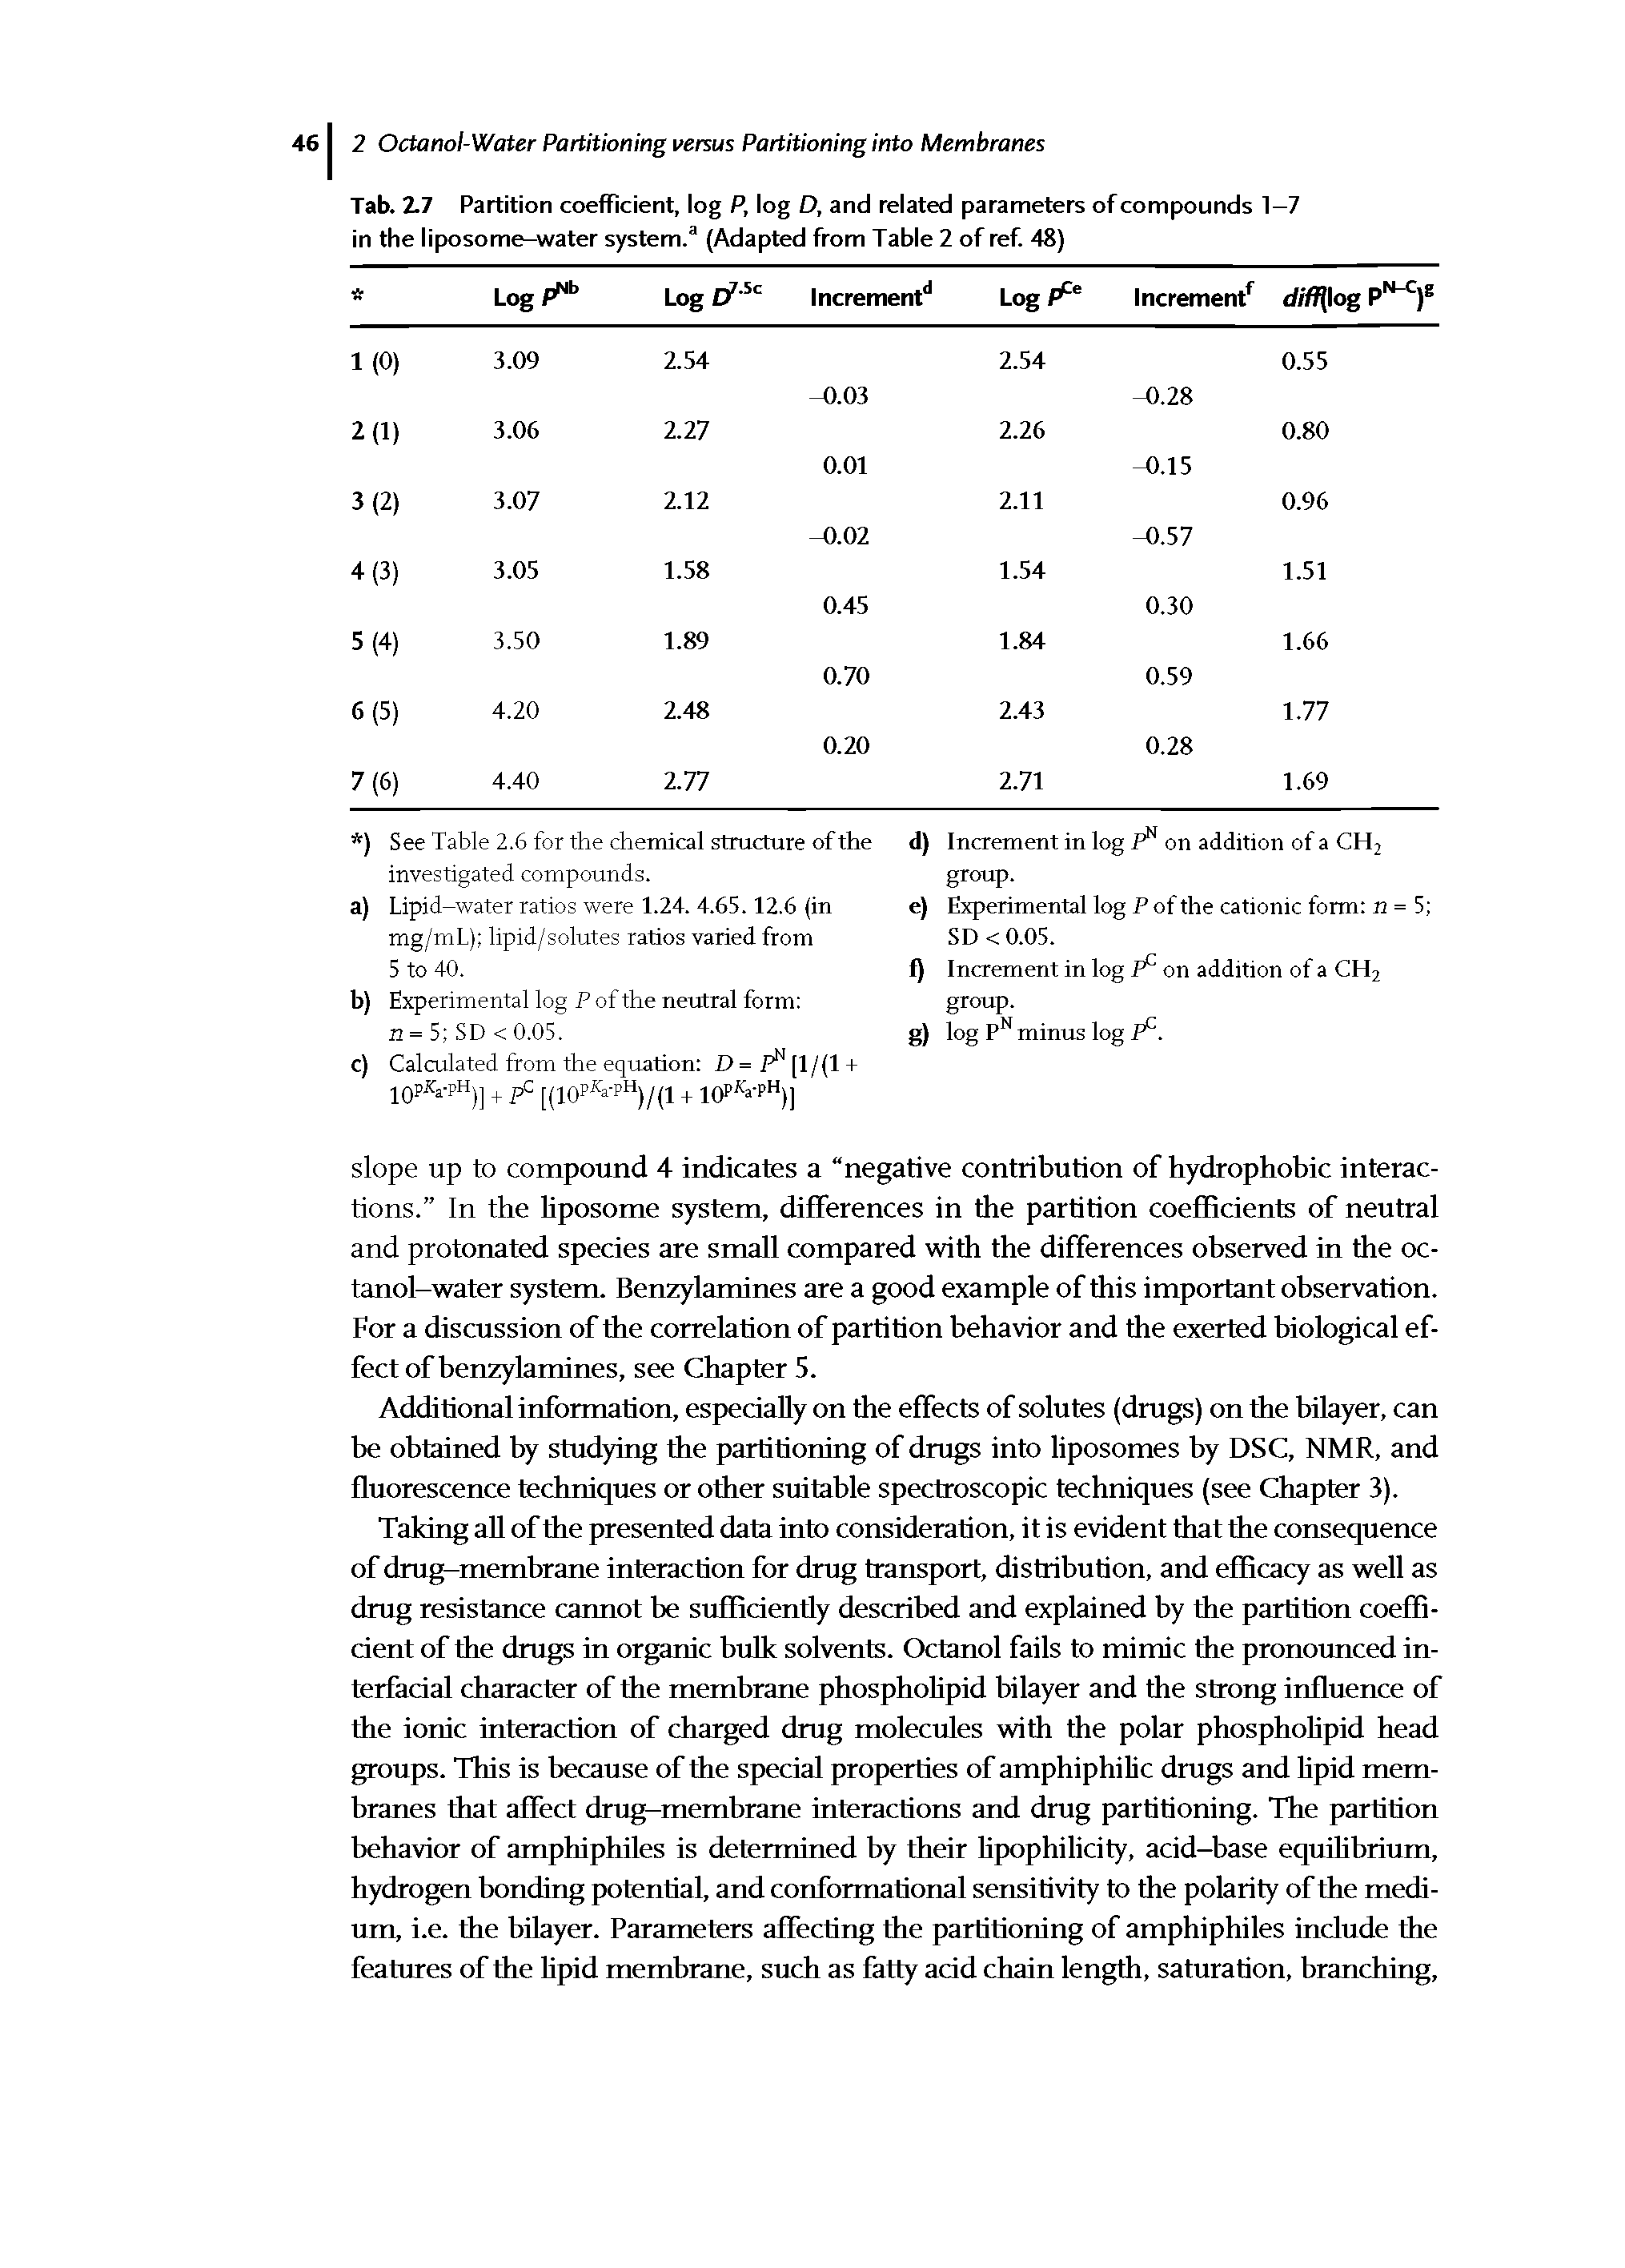 Tab. 2.7 Partition coefficient, log P, log D, and related parameters of compounds 1—7 in the liposome-water system.3 (Adapted from Table 2 of ref. 48)...